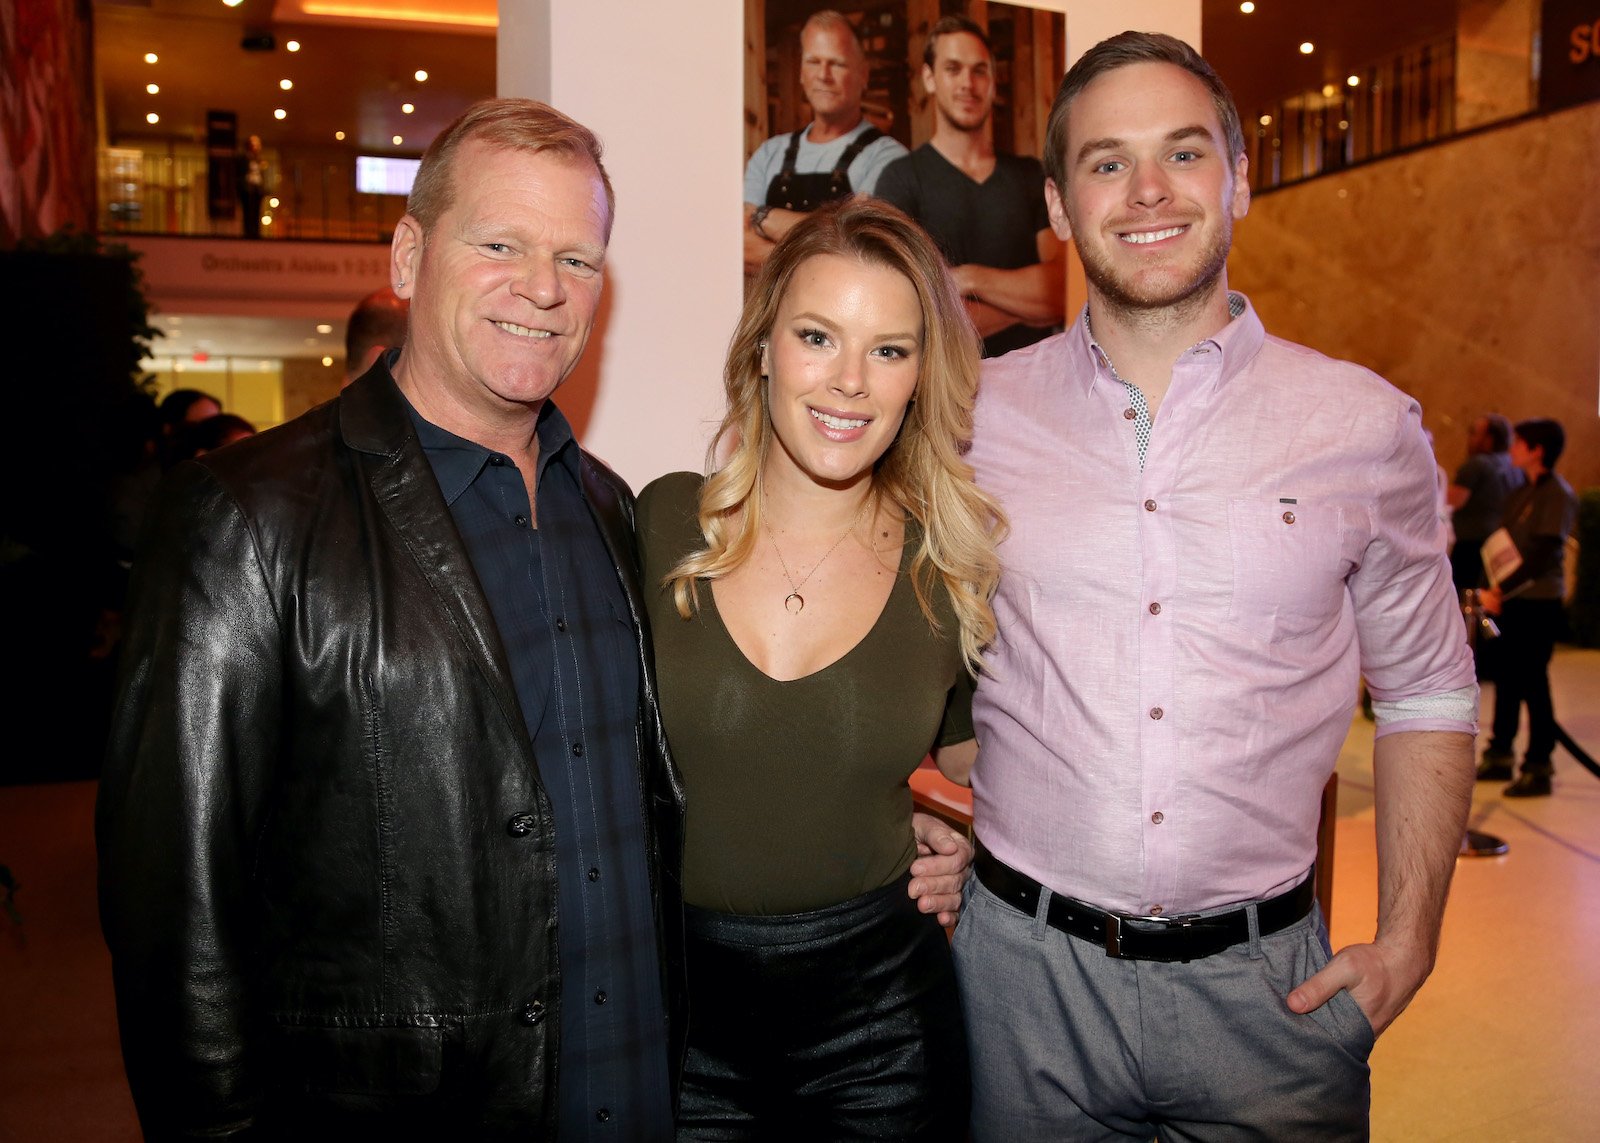 Mike Holmes, Sherry Holmes, and Mike Holmes Jr from Holmes + Holmes attended the Academy of Canadian Cinema and Television's Family Fan Day in 2017